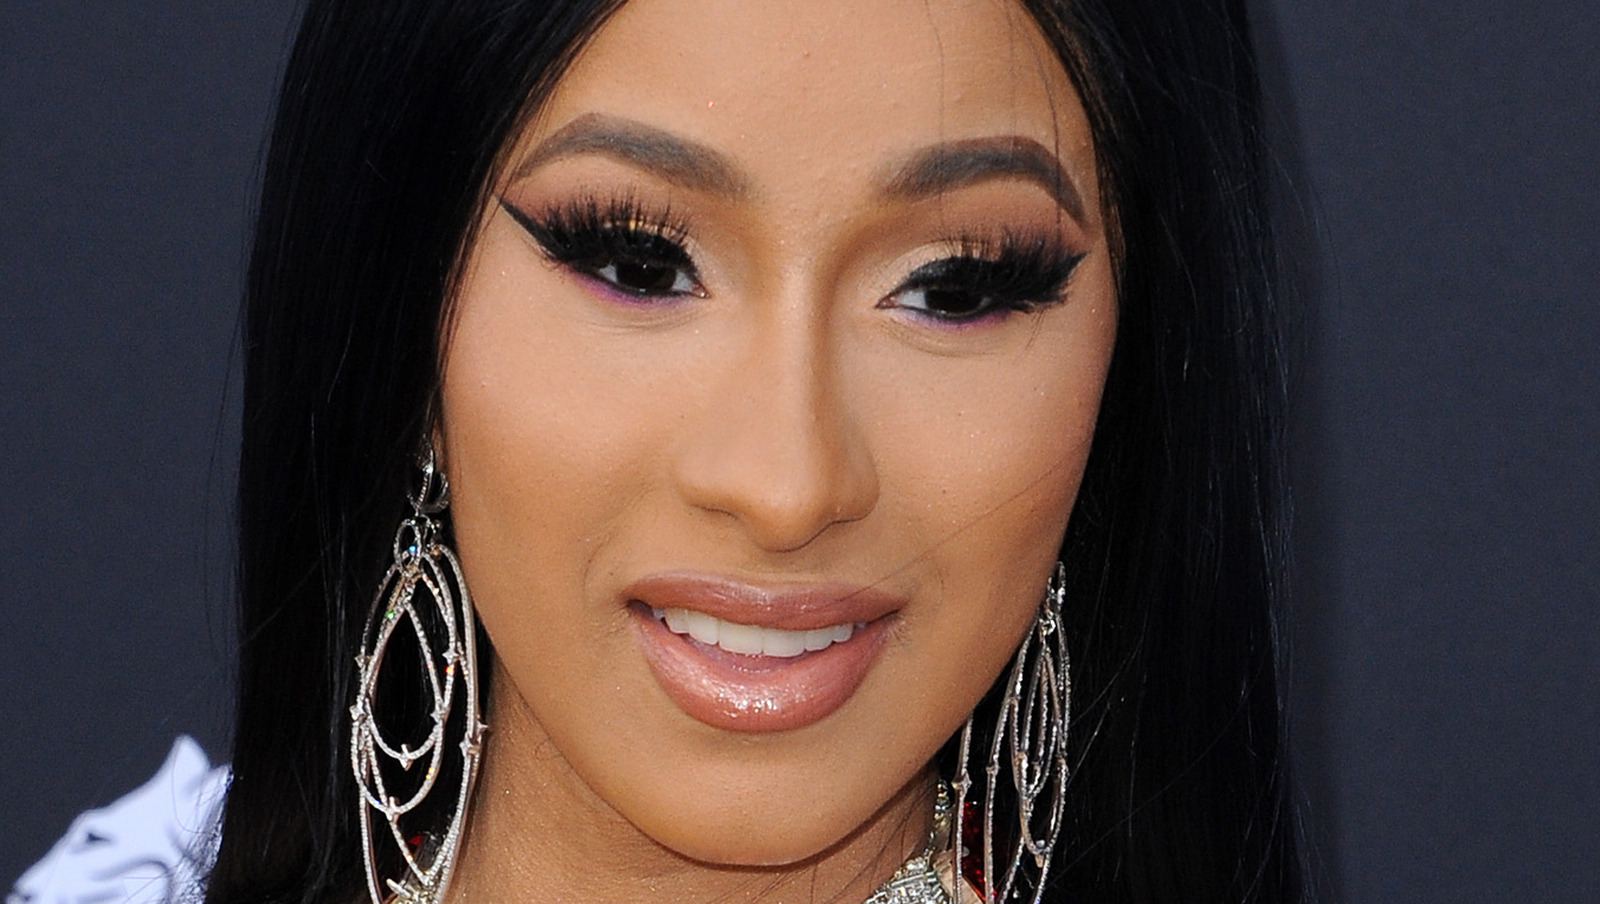 Cardi B had plastic surgery after giving birth to a baby.